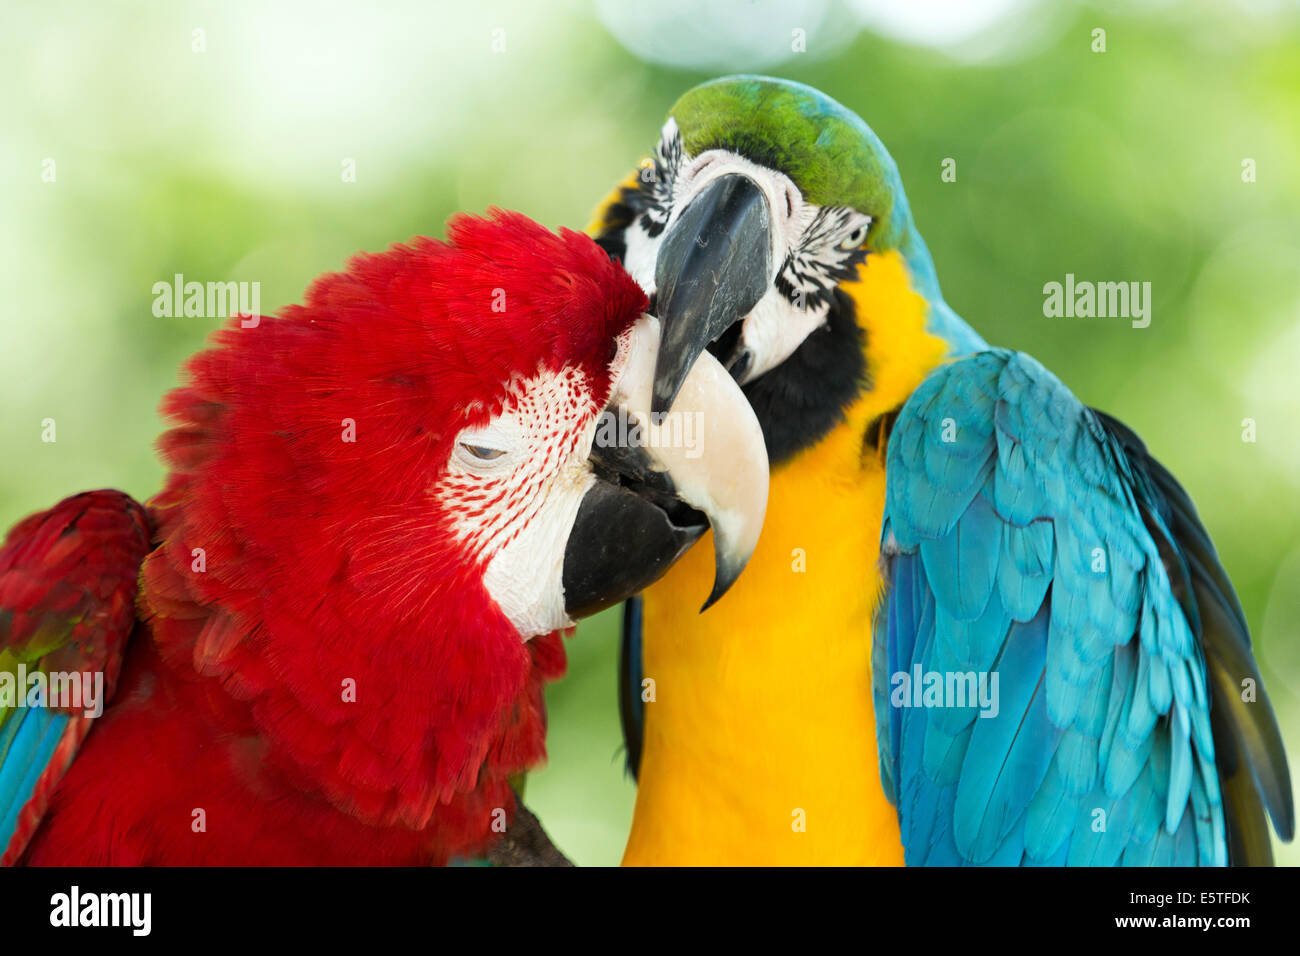 Pair of colorful Macaws parrots Stock Photo